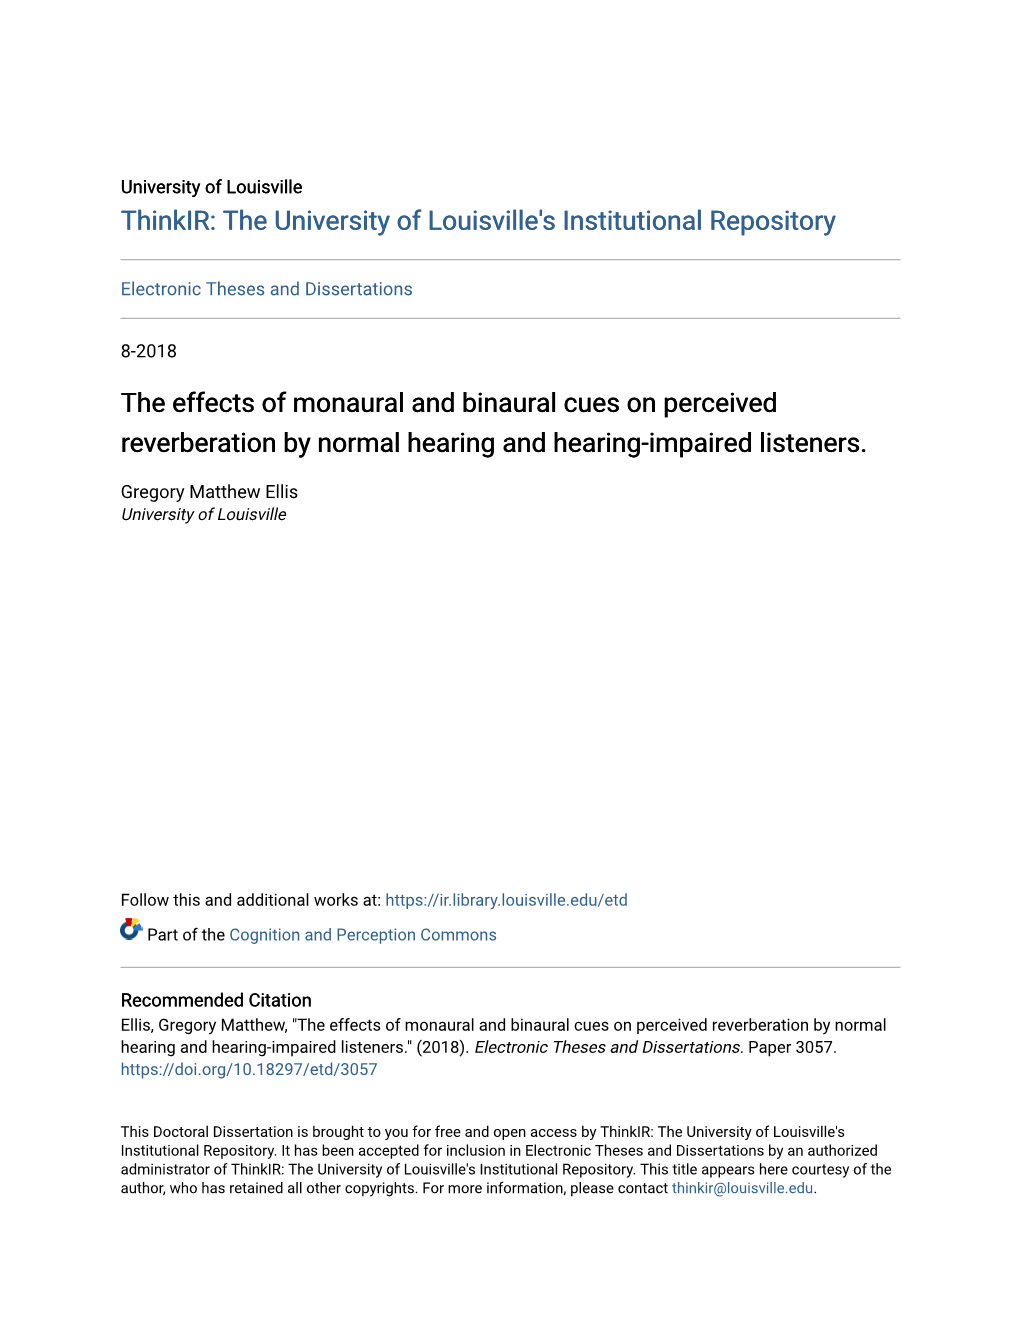 The Effects of Monaural and Binaural Cues on Perceived Reverberation by Normal Hearing and Hearing-Impaired Listeners